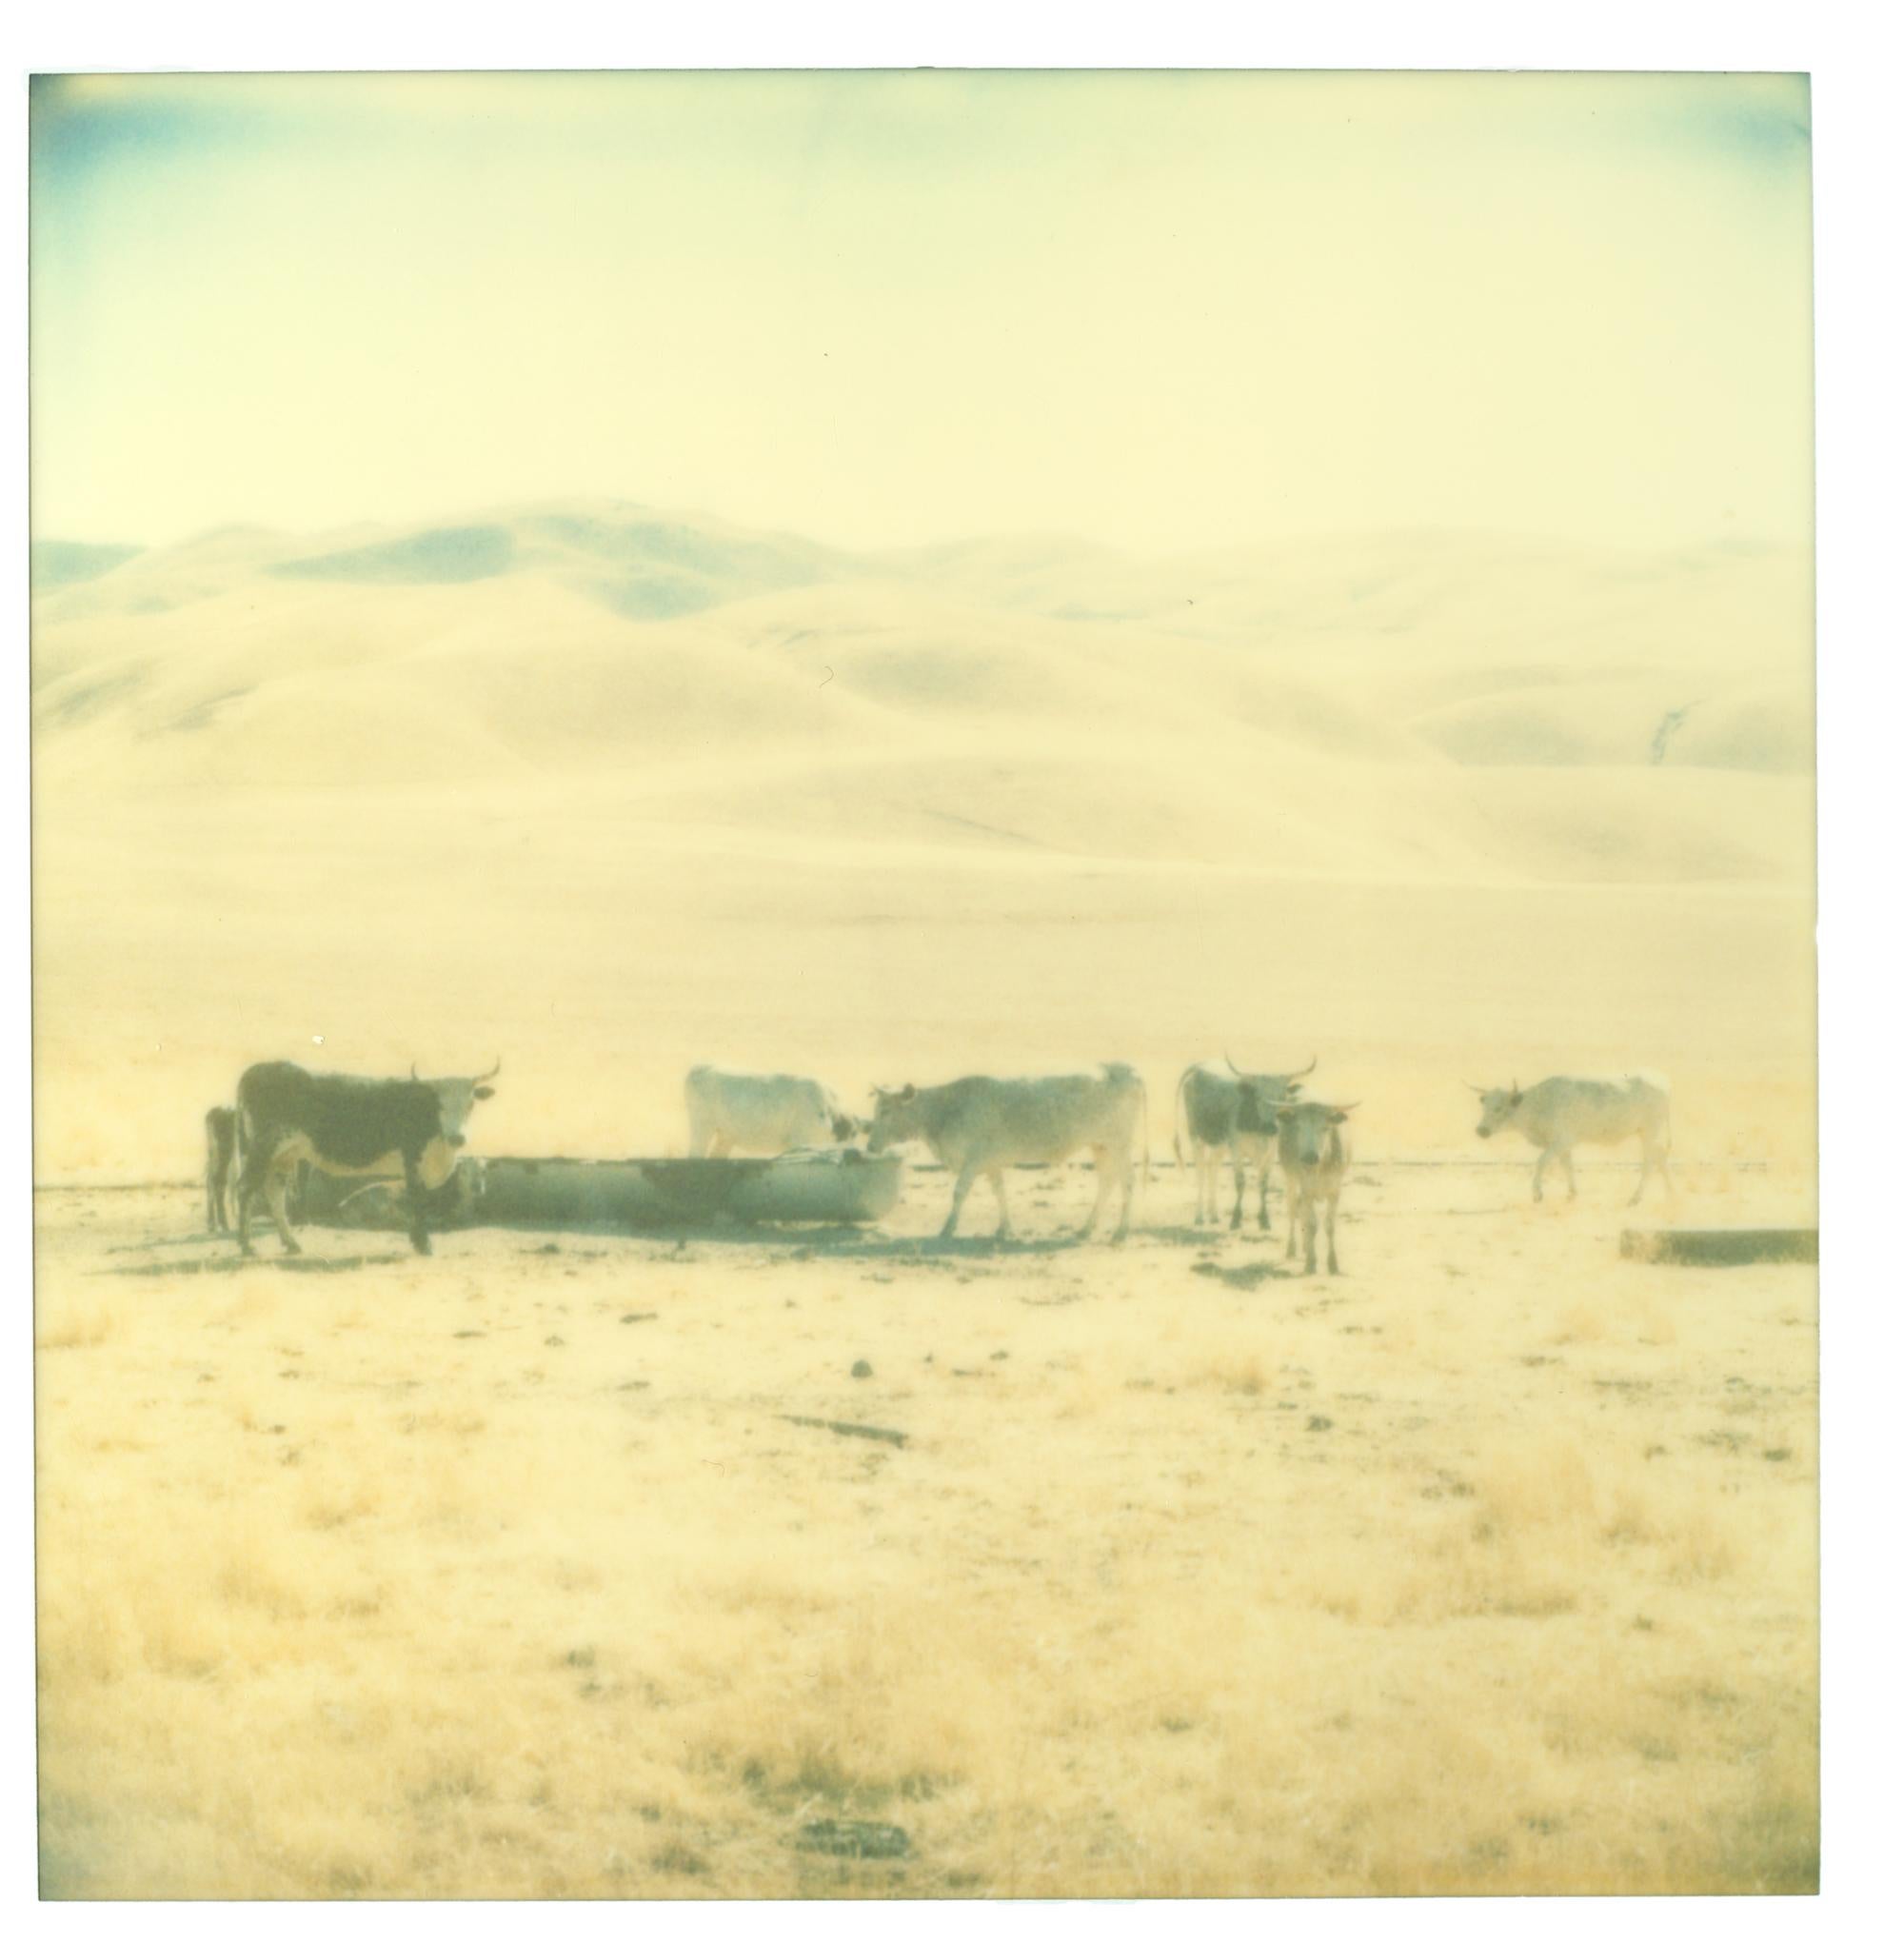 UNtitled (Oilfields), 2004, 60x60cm each, installed 60x200cm, Edition 6/10. Analog C-Print,s based on an expired Polaroids, Certificate and Signature label, artist Inventory No 1198.06, unmounted

OILFIELDS, 2004

Oilfields connotes both the notion